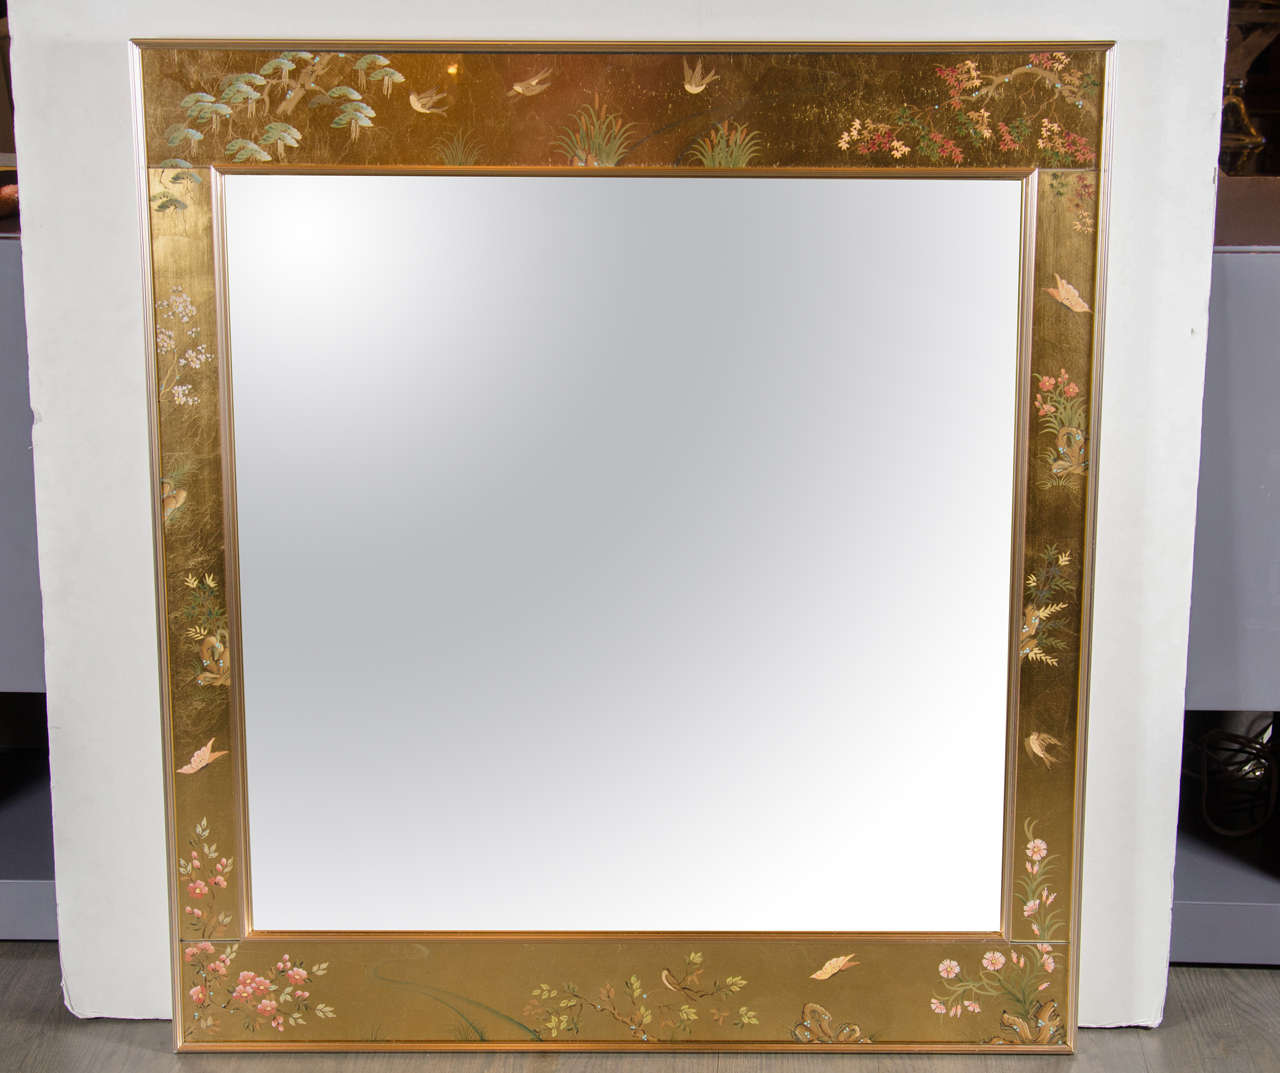 La Barge chinoiserie reverse hand-painted glass, gilt and églomisé mirror, signed Harriet Jansma, 1979. Beveled mirror with chrome anodized aluminum gallery style surround. The mirror is then framed by a painted chinoiserie scence depicting Cherry